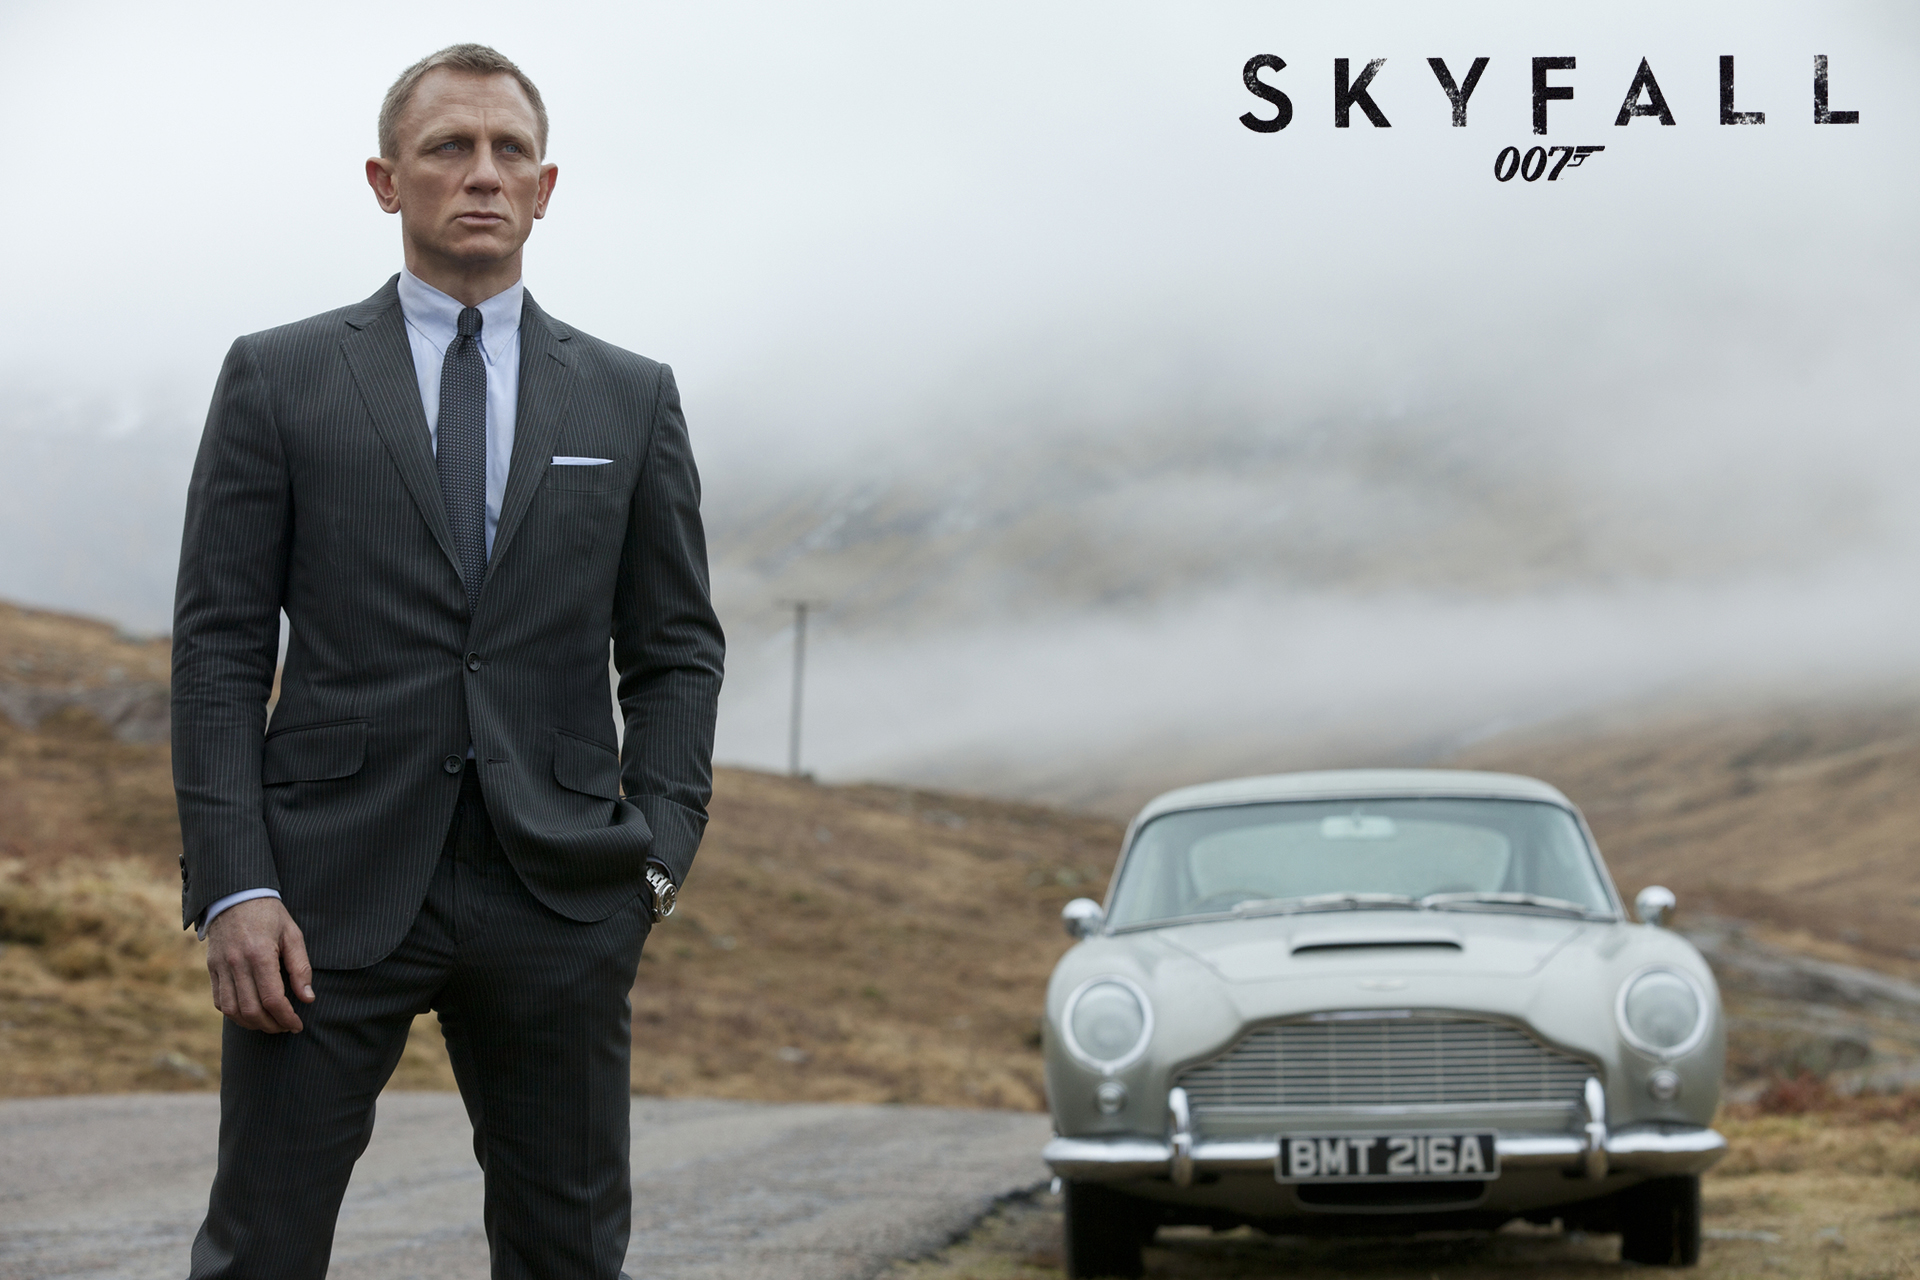 Daniel Craig stars as James Bond in Metro-Goldwyn-Mayer Pictures/Columbia Pictures/EON Productions’ action adventure SKYFALL.